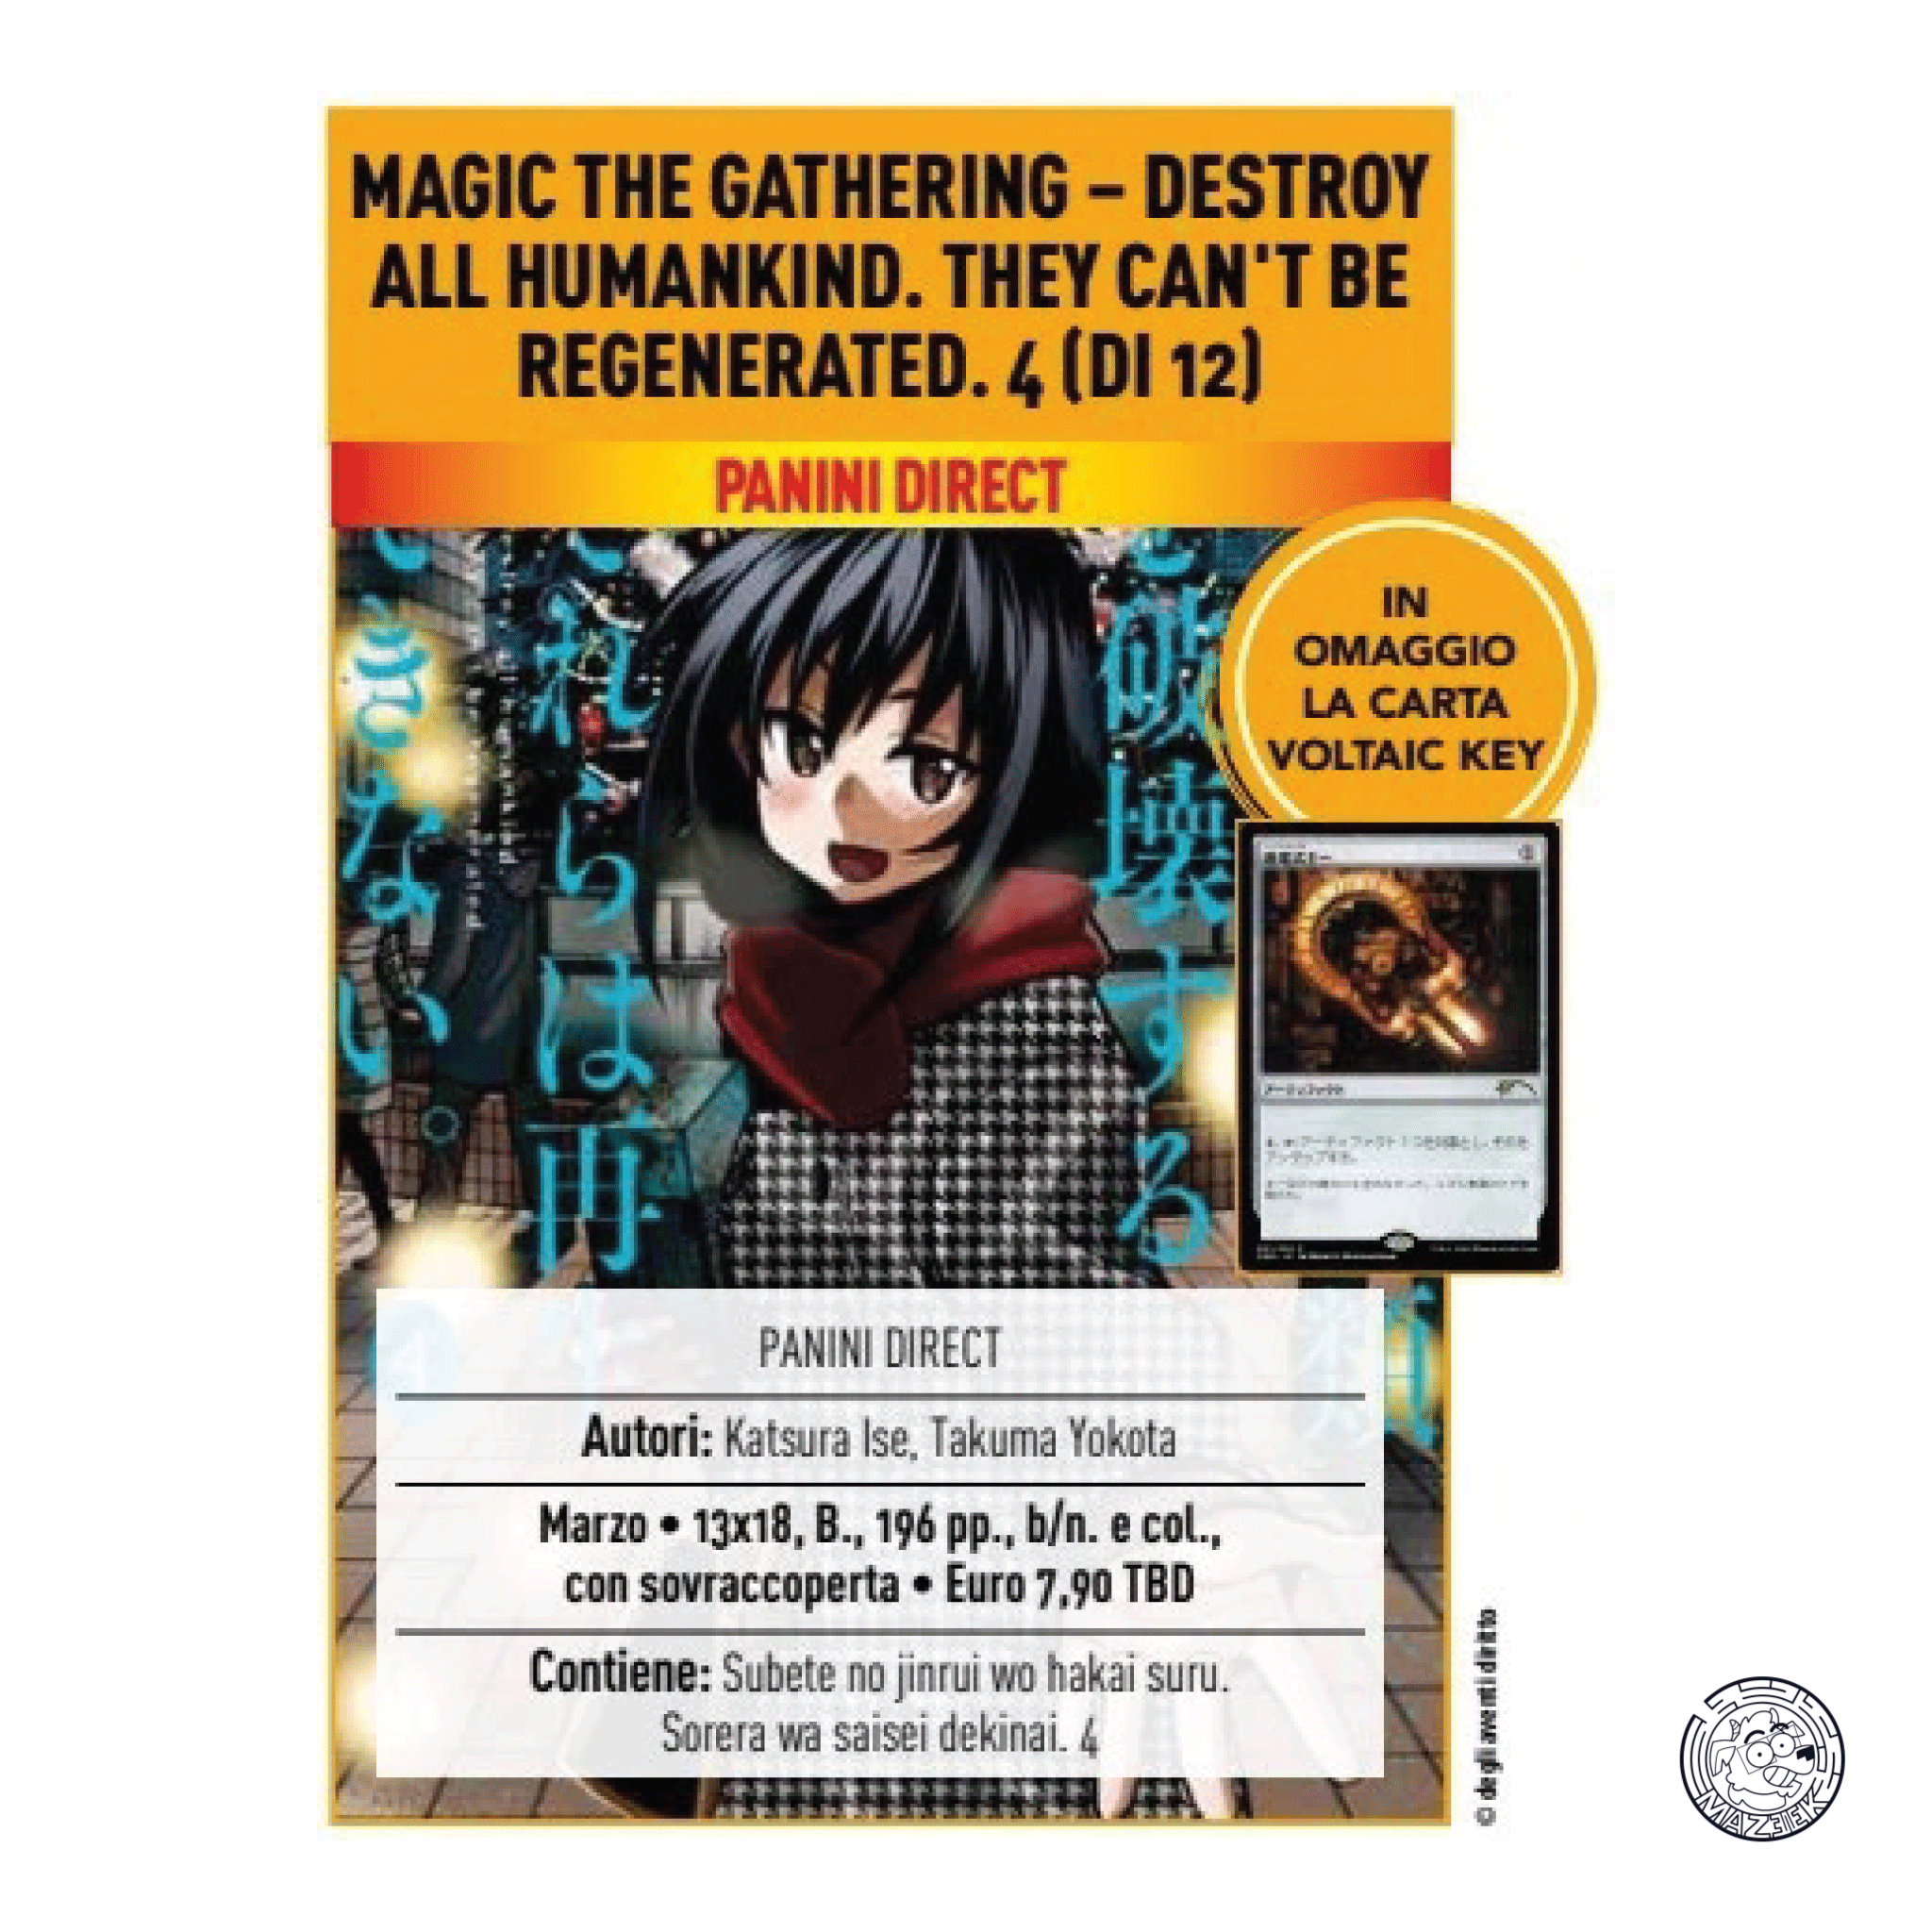 Magic the Gathering – Destroy All Humankind. They Can't Be Regenerated 04 (+ carta Voltaic Key)